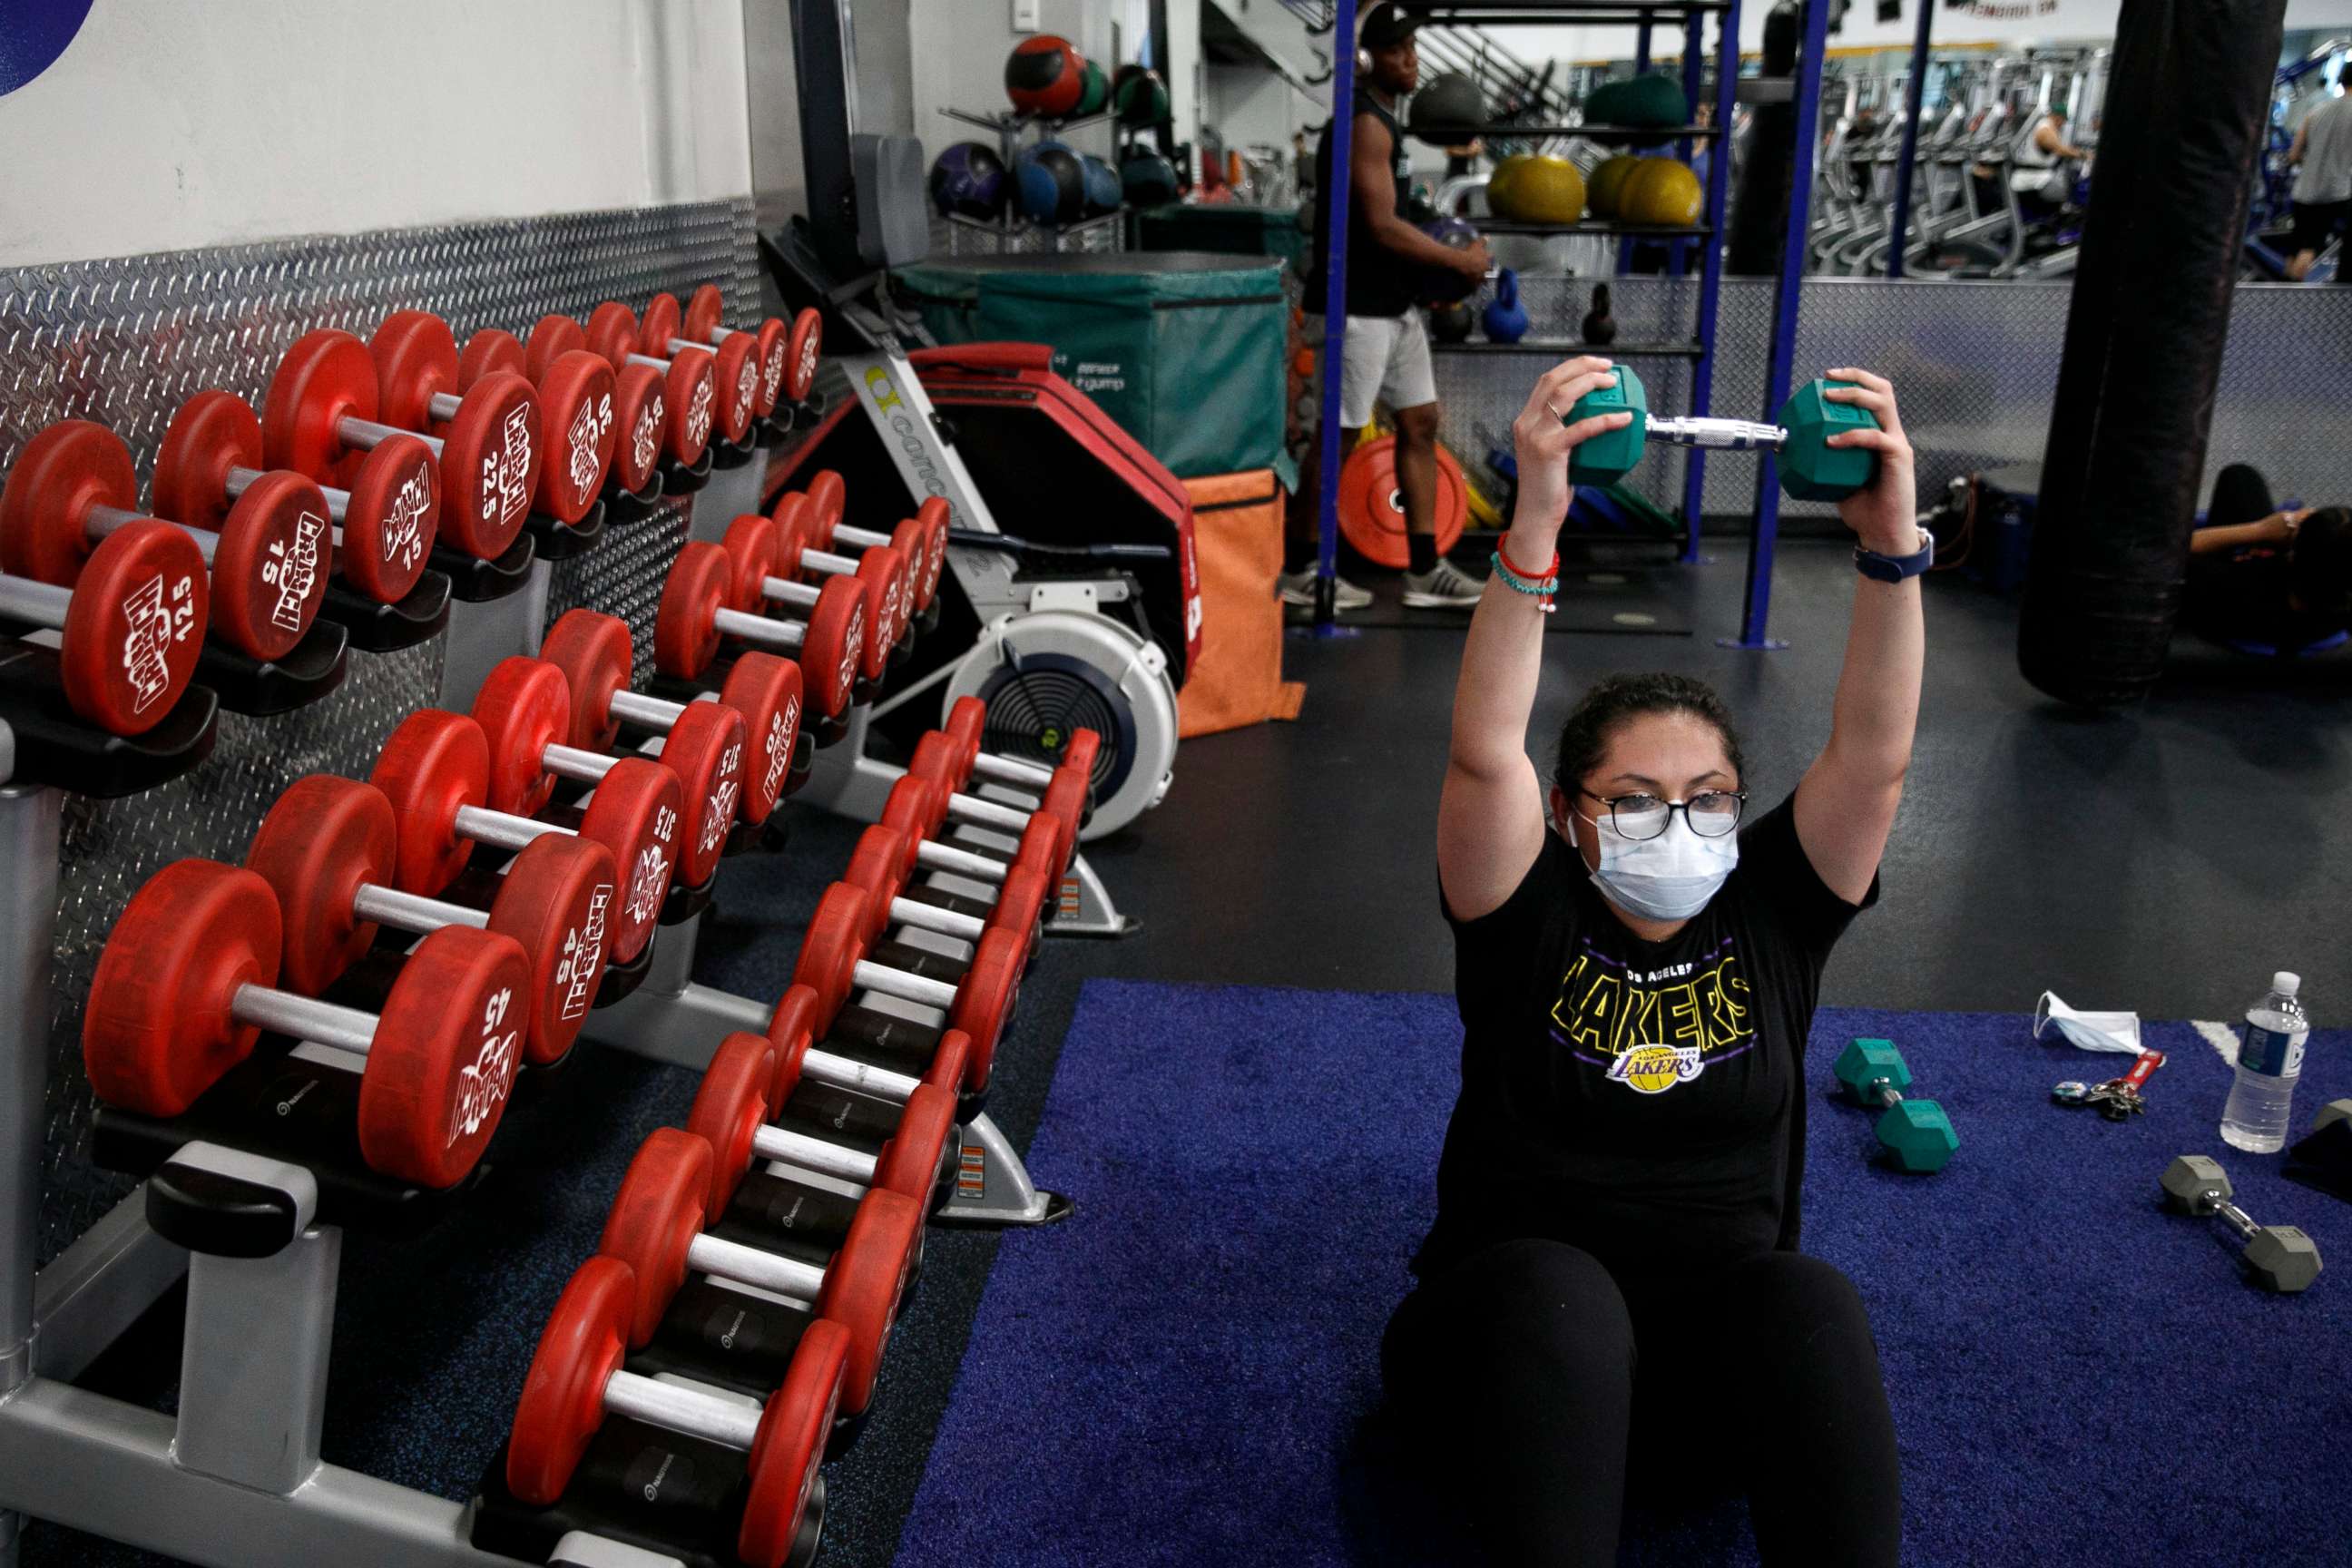 PHOTO: In this June 26, 2020, file photo, a woman wears a mask while exercising at a gym in Los Angeles.